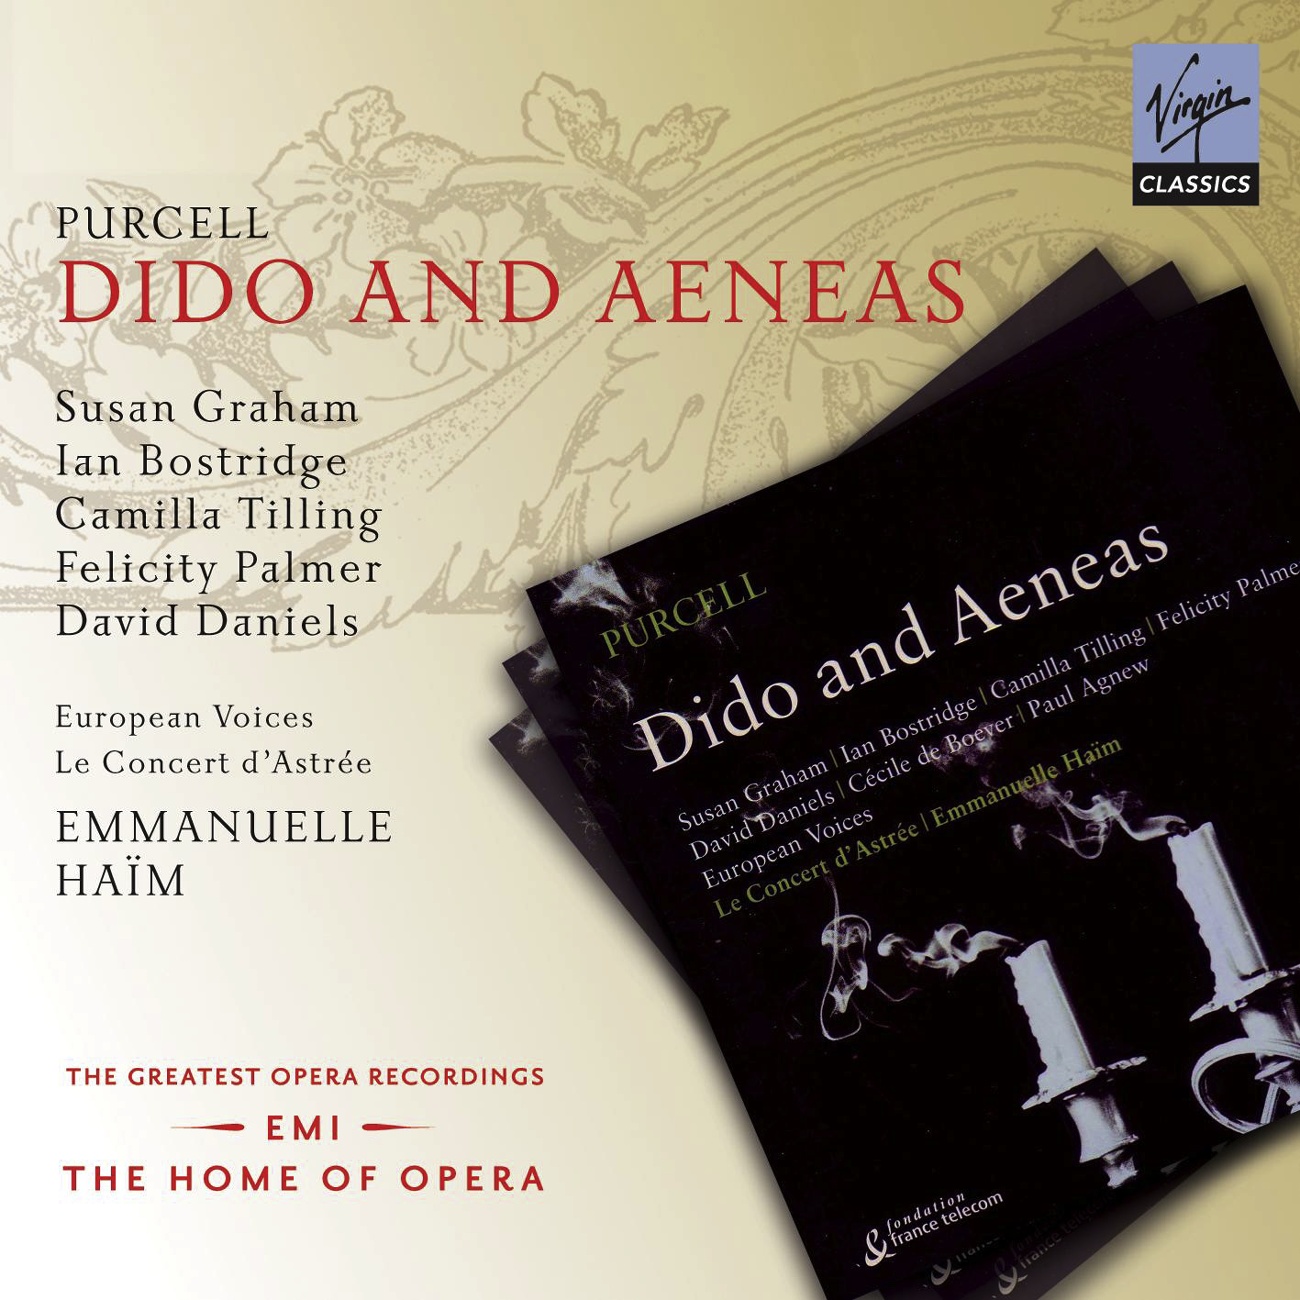 Dido and Aeneas, ACT 3, Scene 1: The Ships: The Witches' Dance